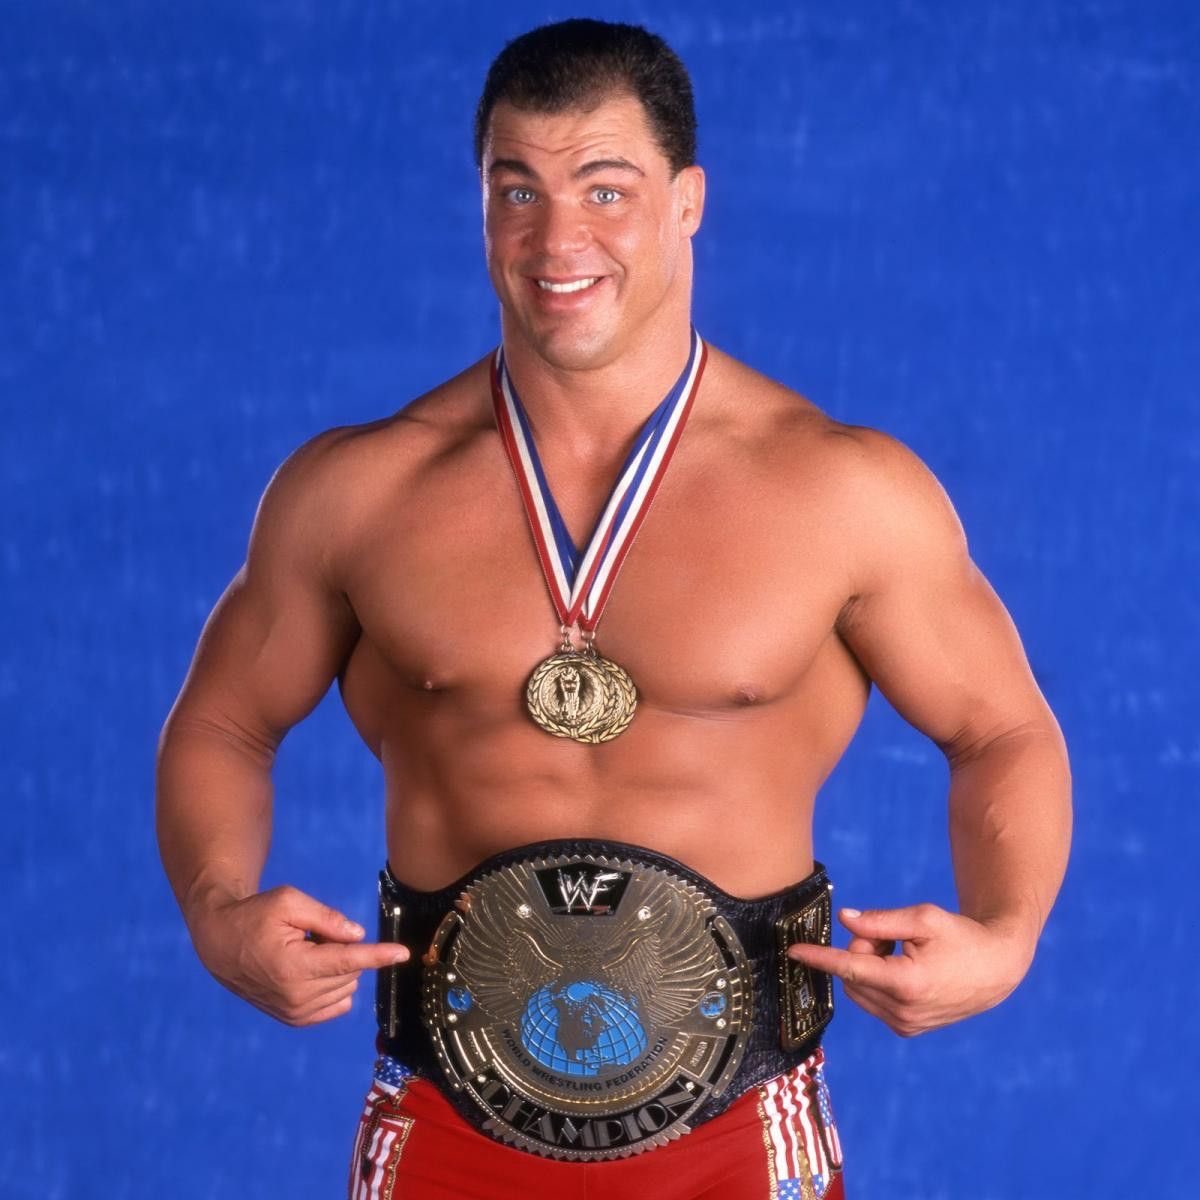 February 2001 would see 3 WWF Championship changes on house shows.X-Pac would win his 3rd title on the 3rd.Benoit would win his 2nd title on the 4th by submission.Kurt Angle would become WWF Champion for the 2nd time on the 10th. #WWE  #AlternateHistory